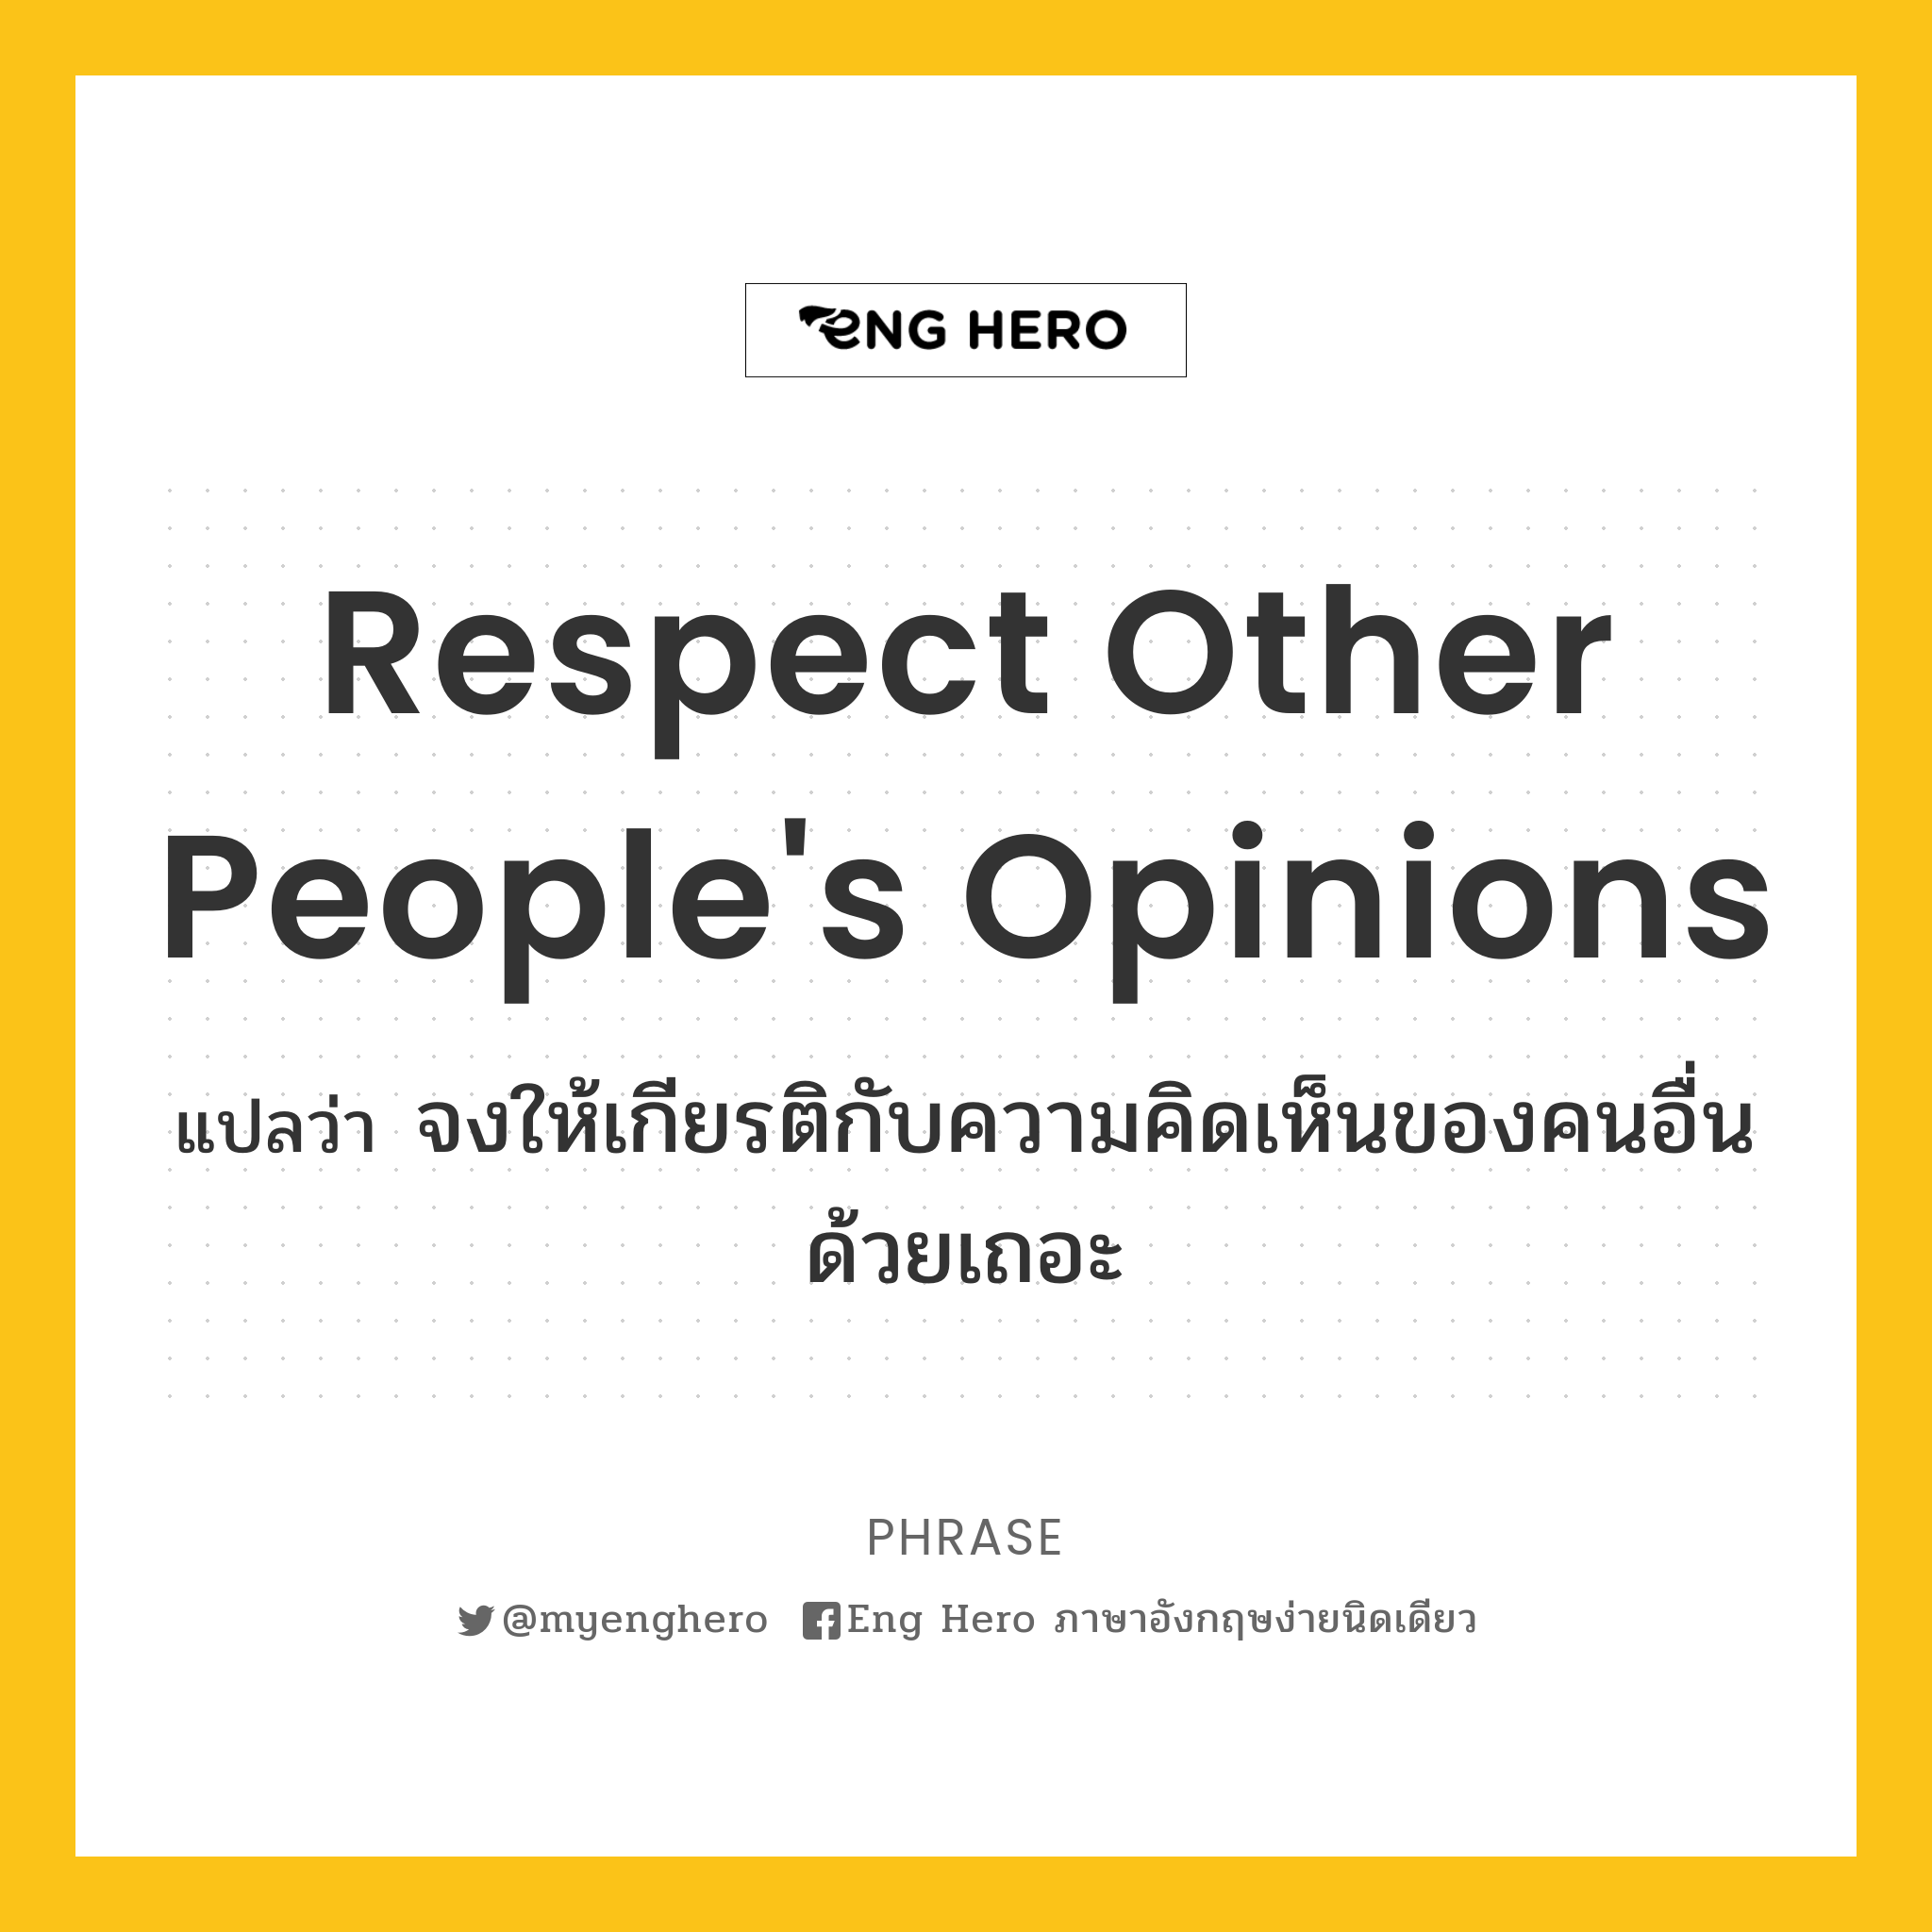 Respect other people's opinions